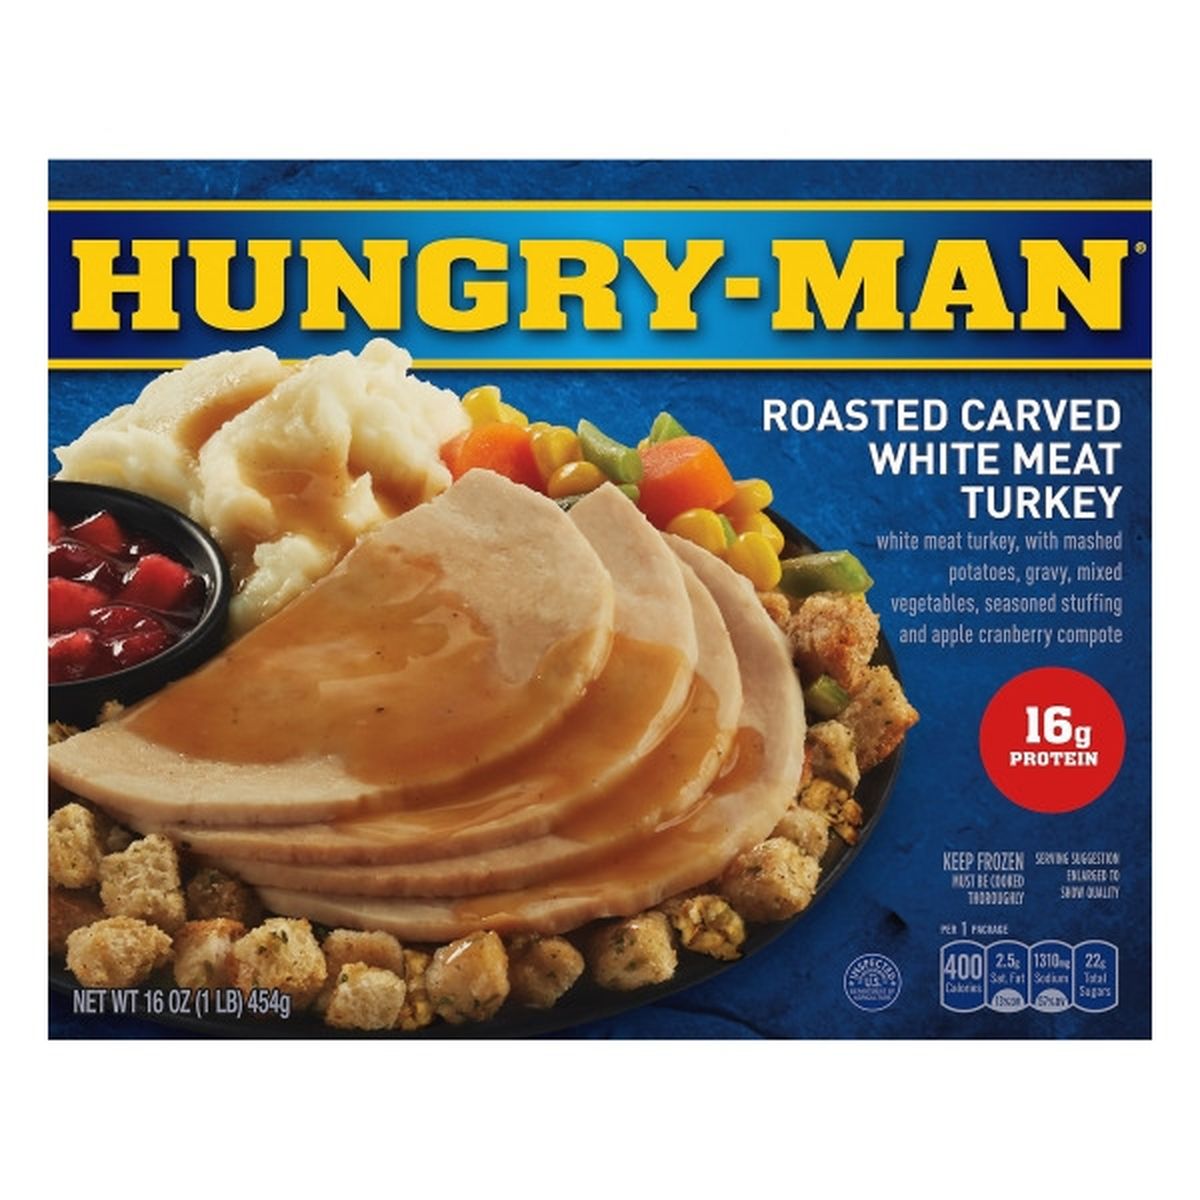 Calories in Hungry-Man Roasted Carved White Meat Turkey